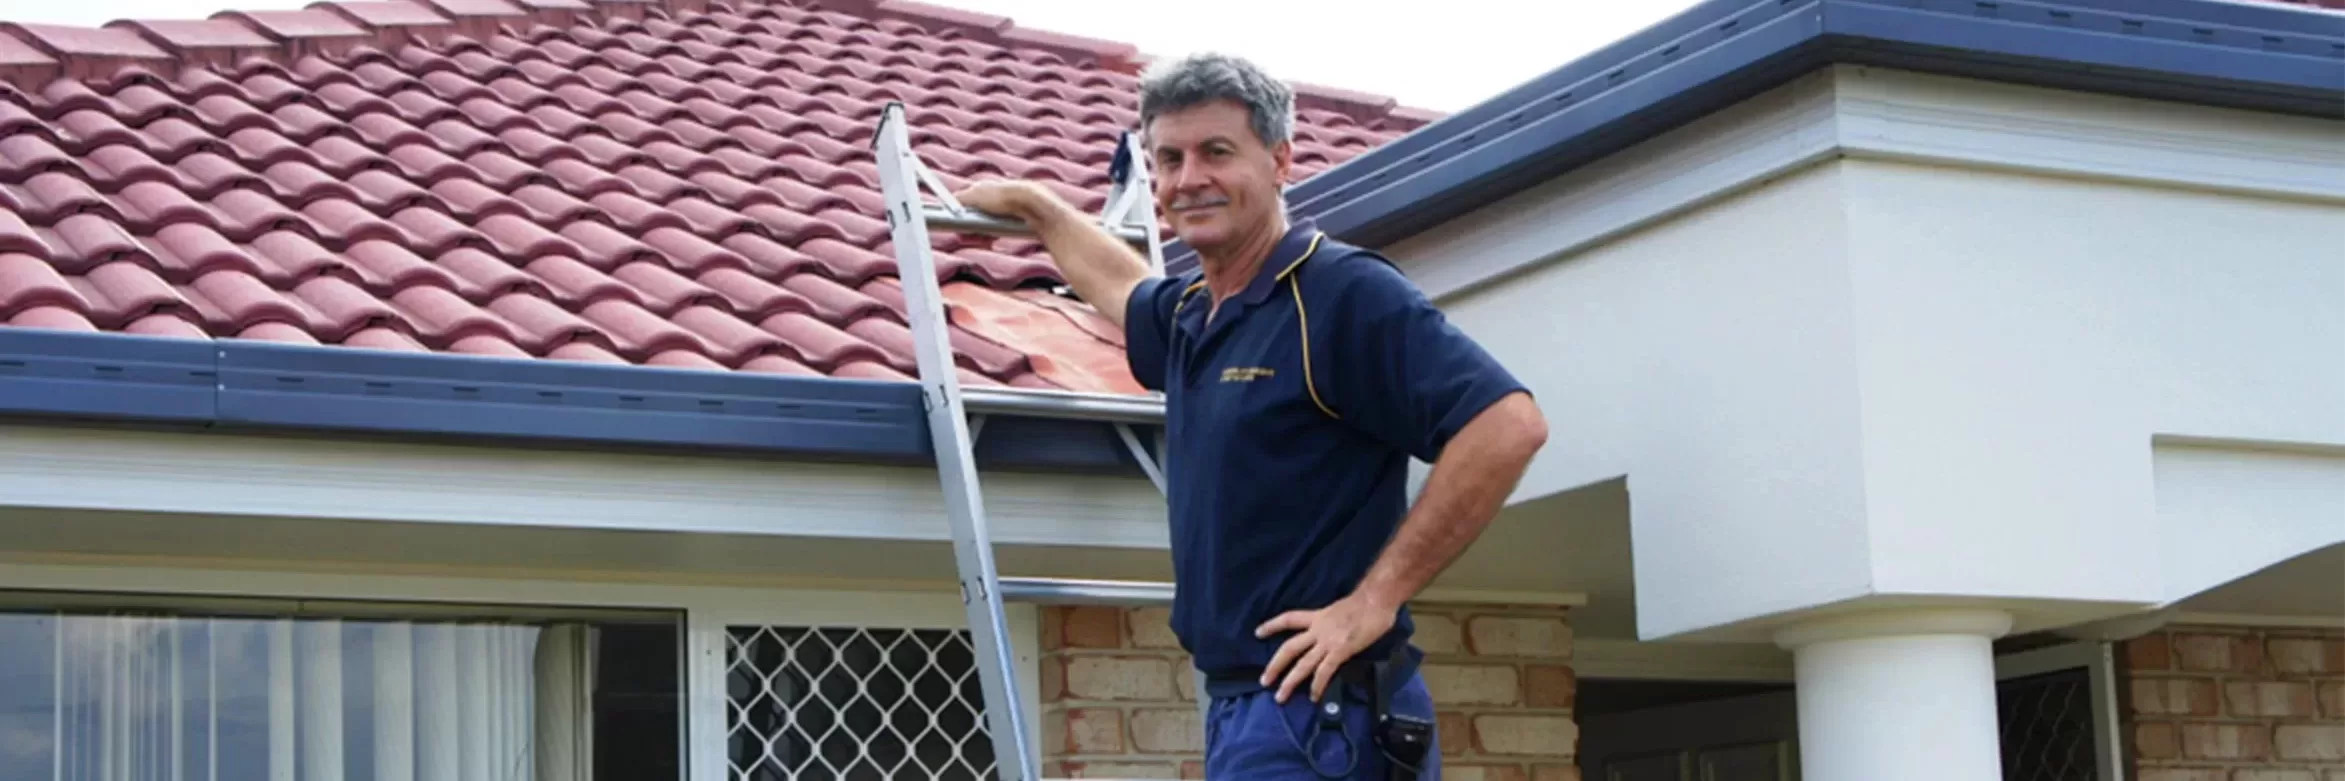 The 7 Best Building & Pest Inspection Companies on the Sunshine Coast – Compared & Reviewed